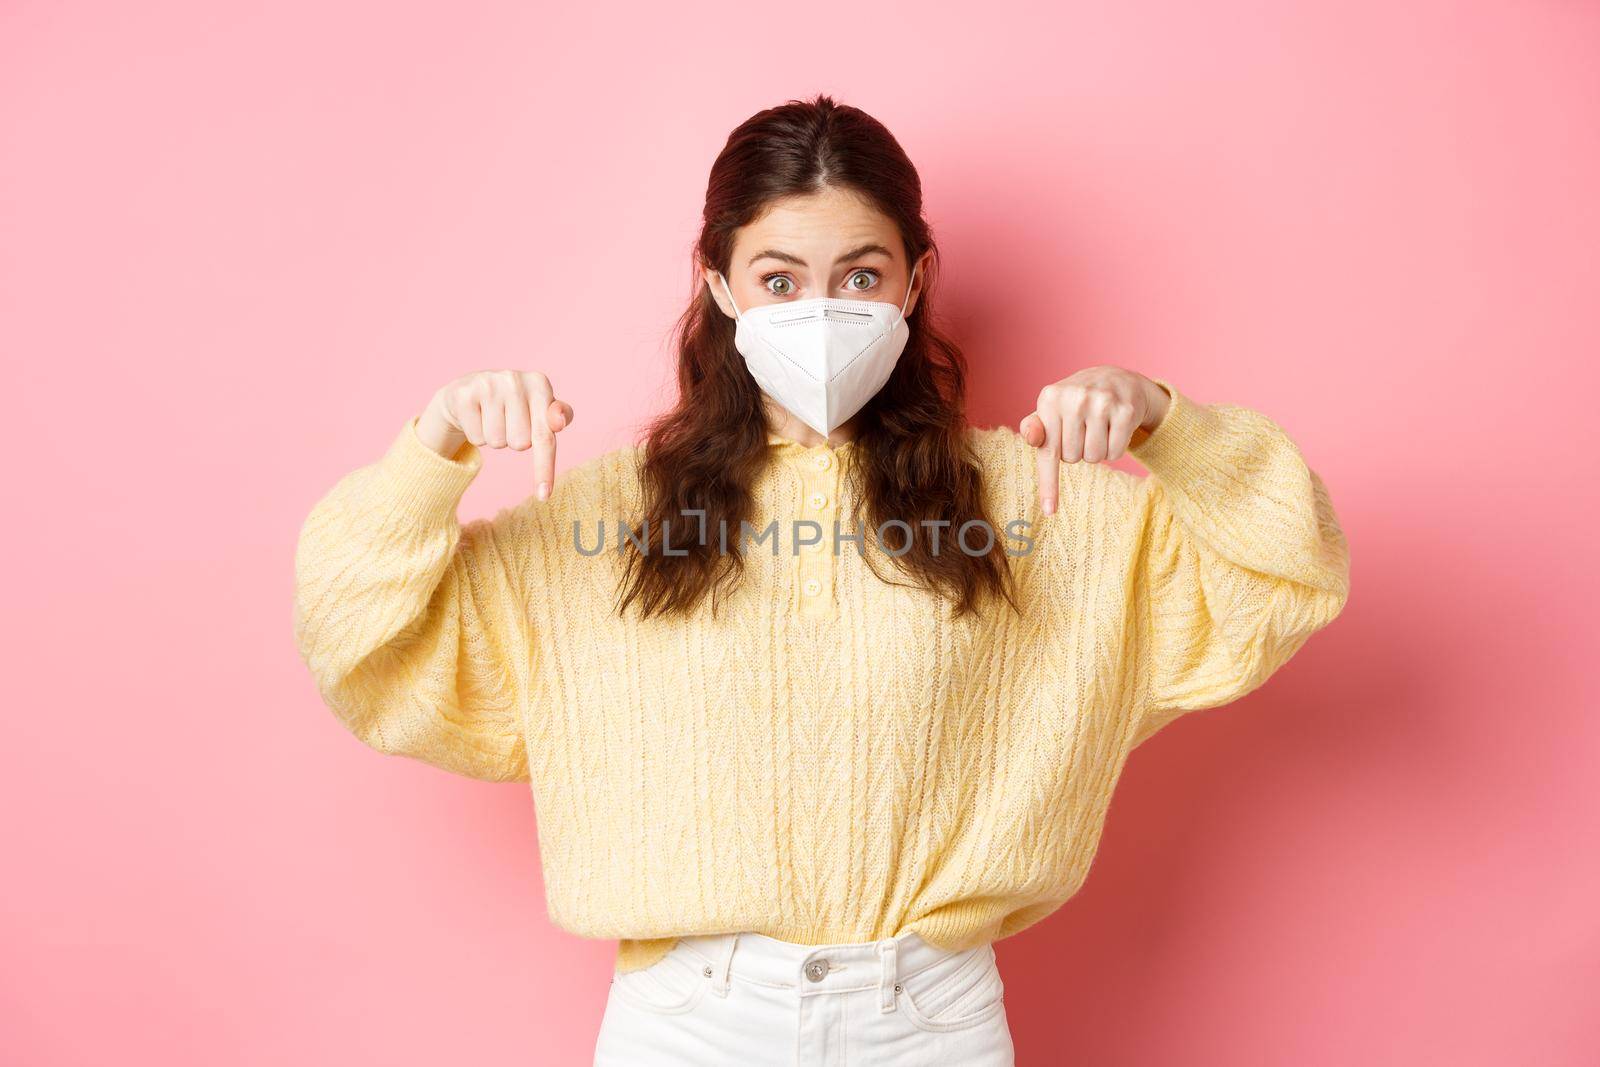 Preventive measures, health care concept. Excited woman in medical respirator pointing fingers down at copyspace, showing promo, standing against pink background.